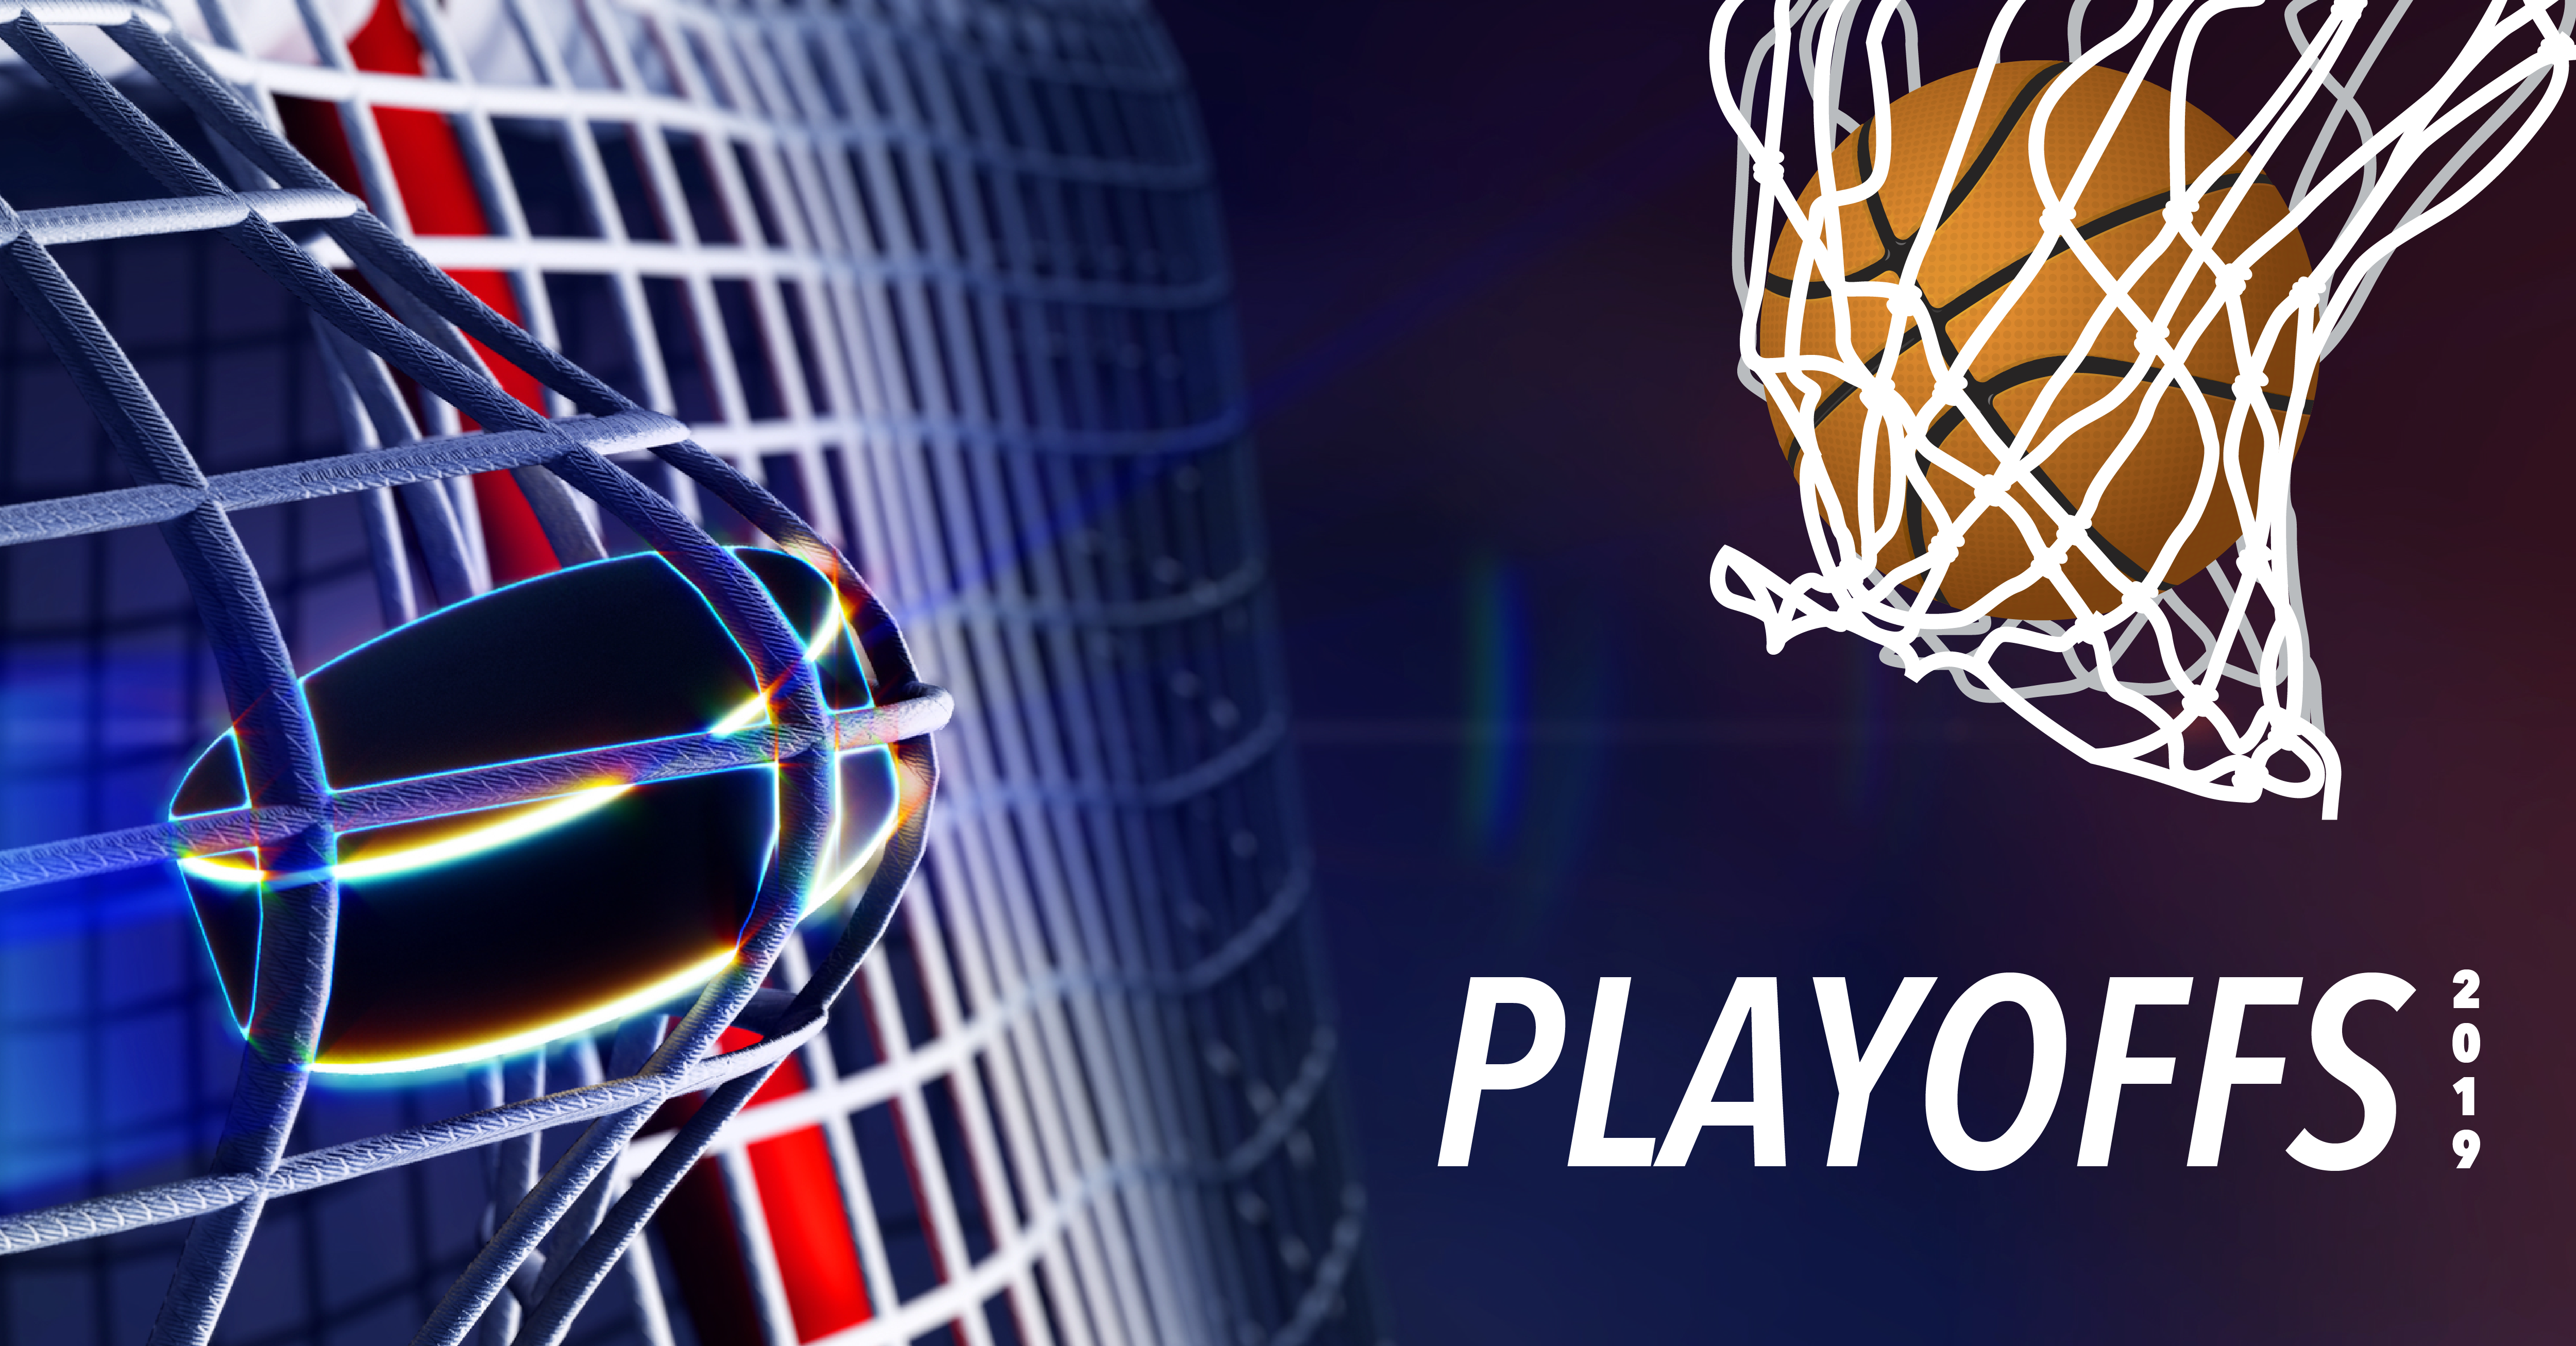 How The NBA And NHL Playoffs Can Help Your Business 01